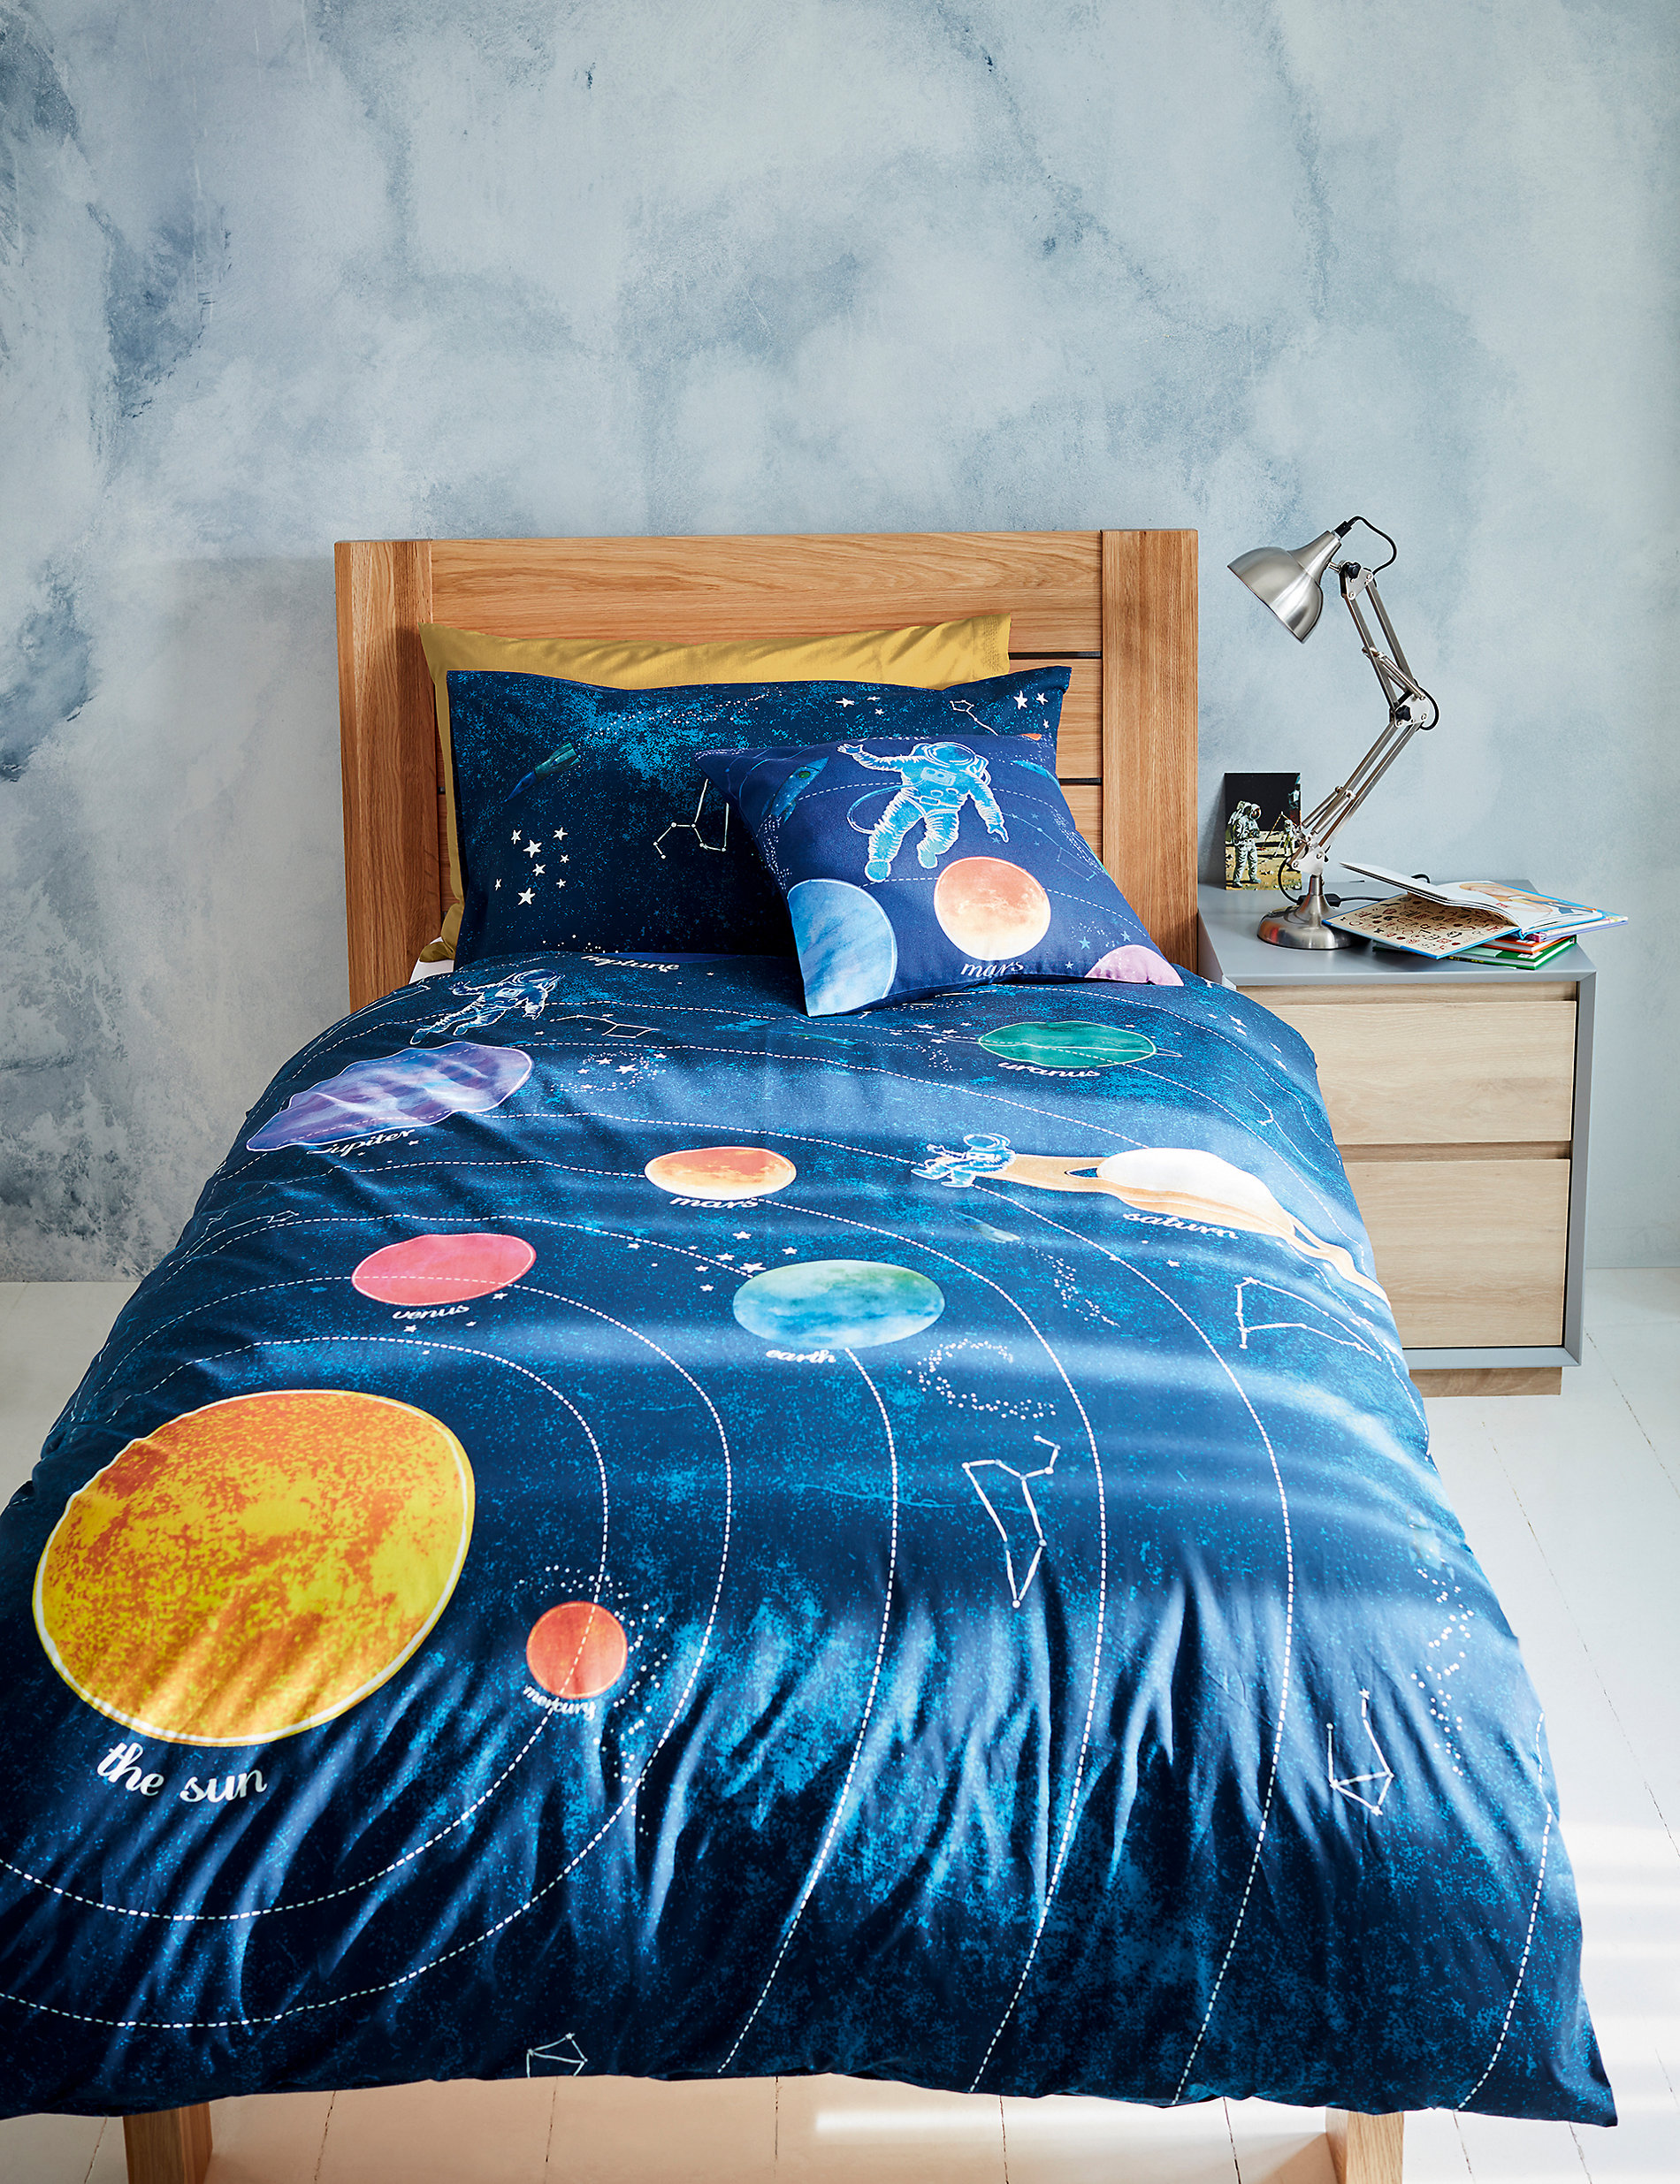 SPACE SINGLE FITTED SHEET & PILLOWCASE SET BLUE PLANETS KIDS BEDDING 